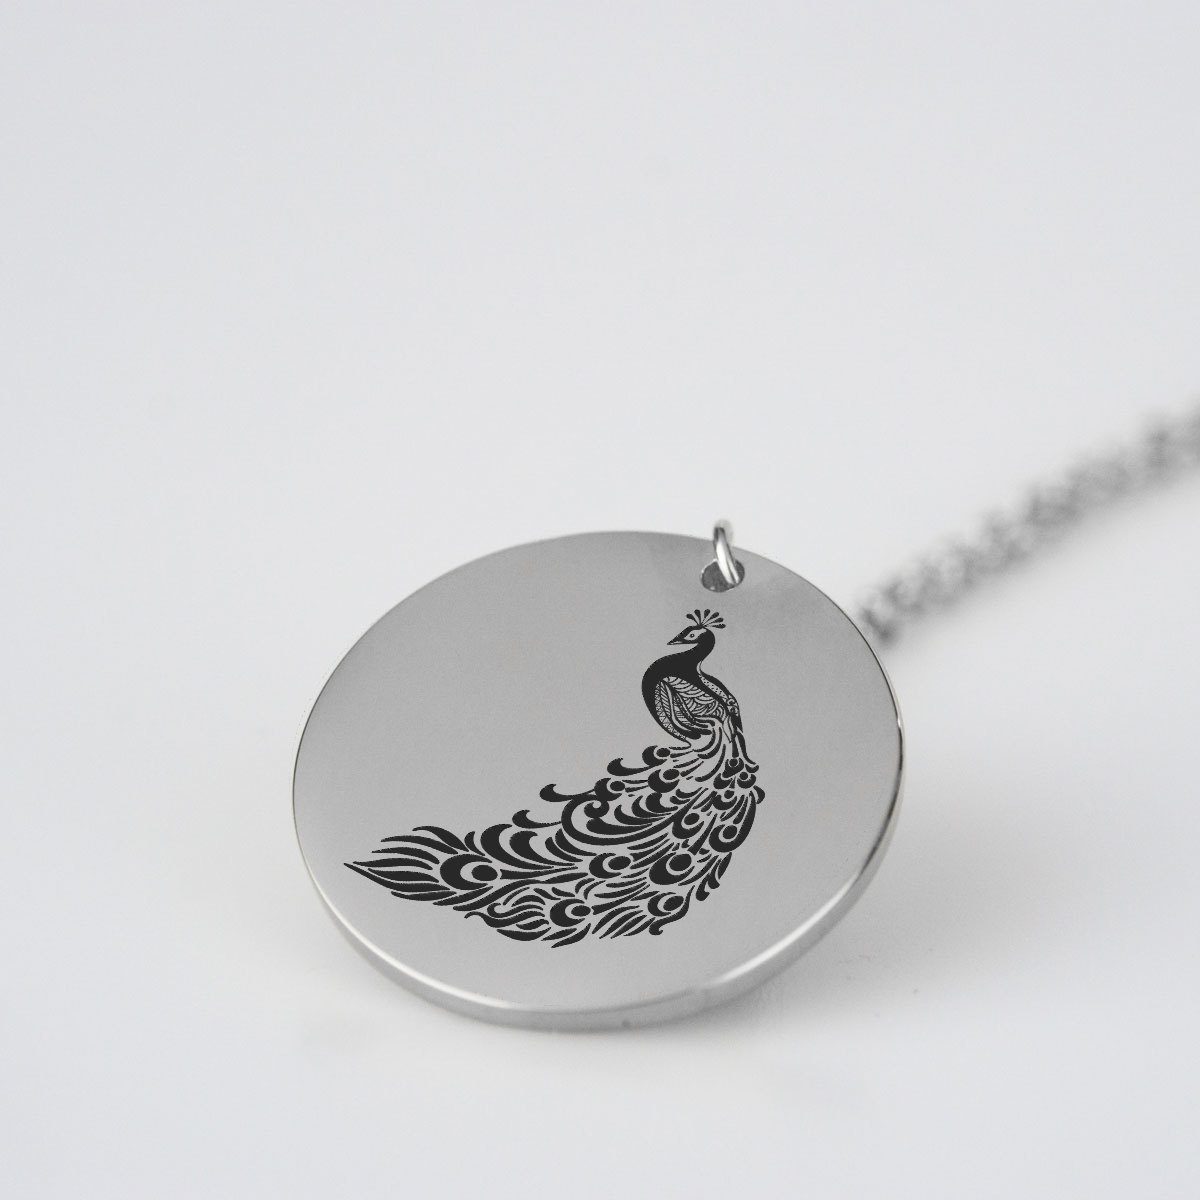 Engraved Peacock Charm Necklace